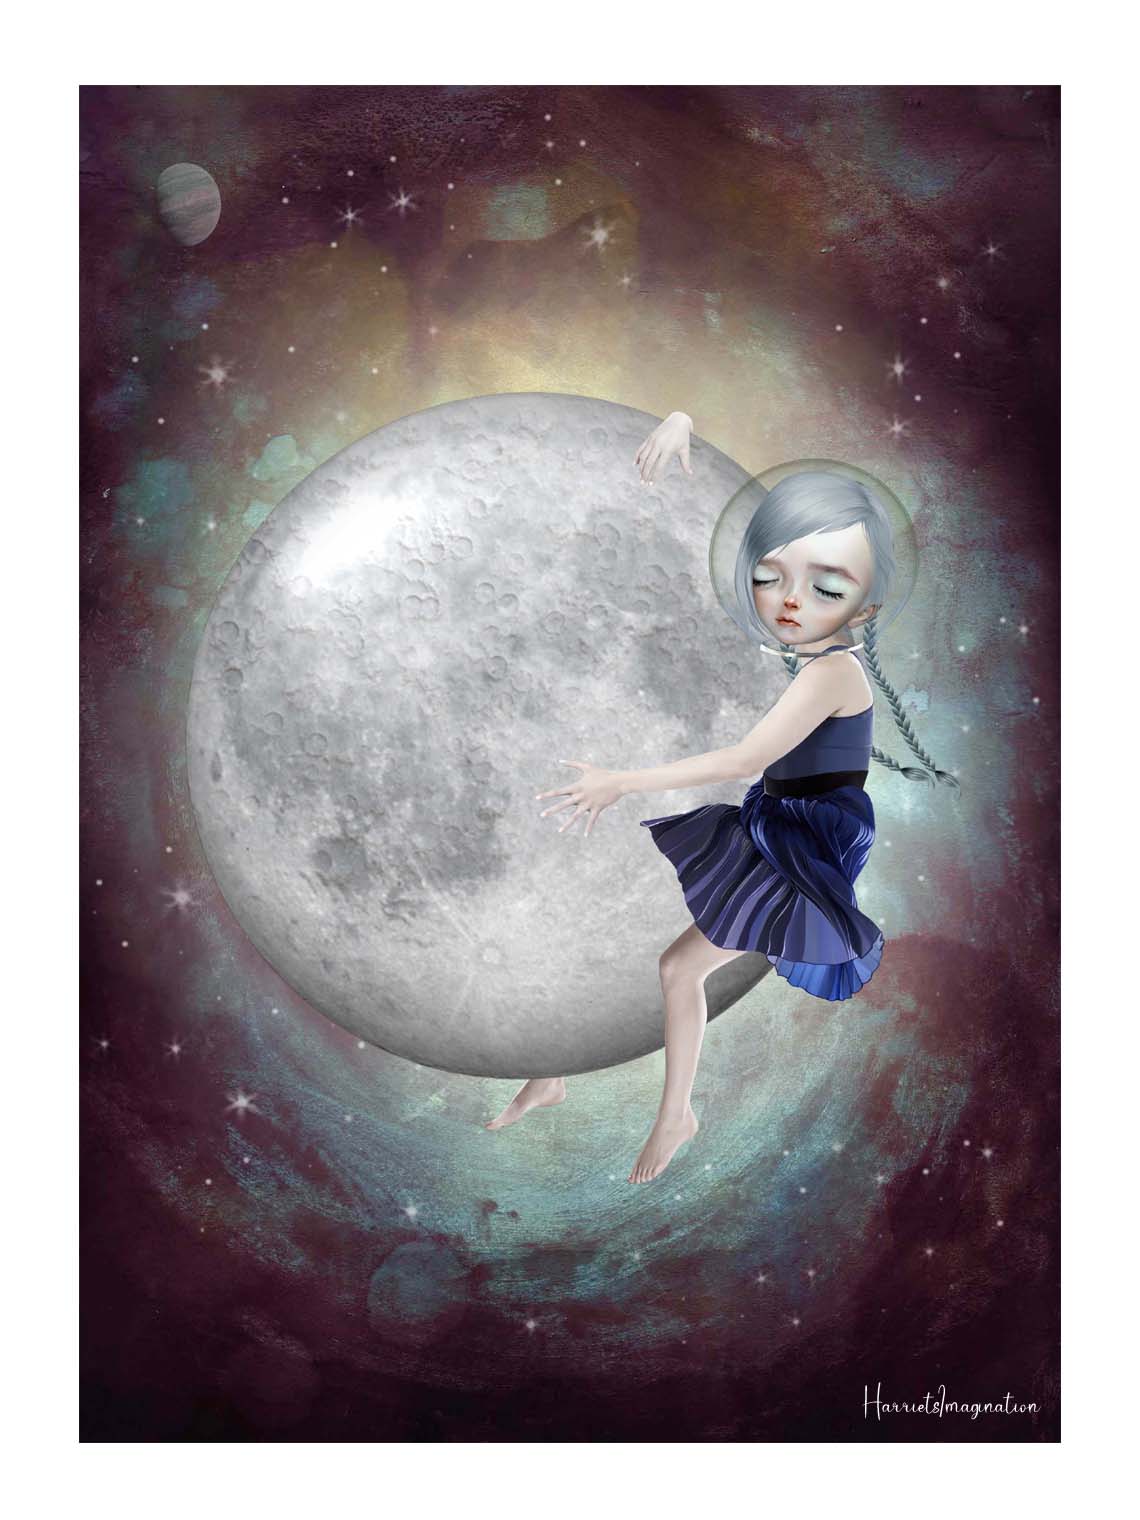 Moon Child art print. Featuring a girl hugging the moon, this unique image captures the beauty and wonder of the night sky. Perfect for any space enthusiast, this print will bring a touch of celestial magic to any room.